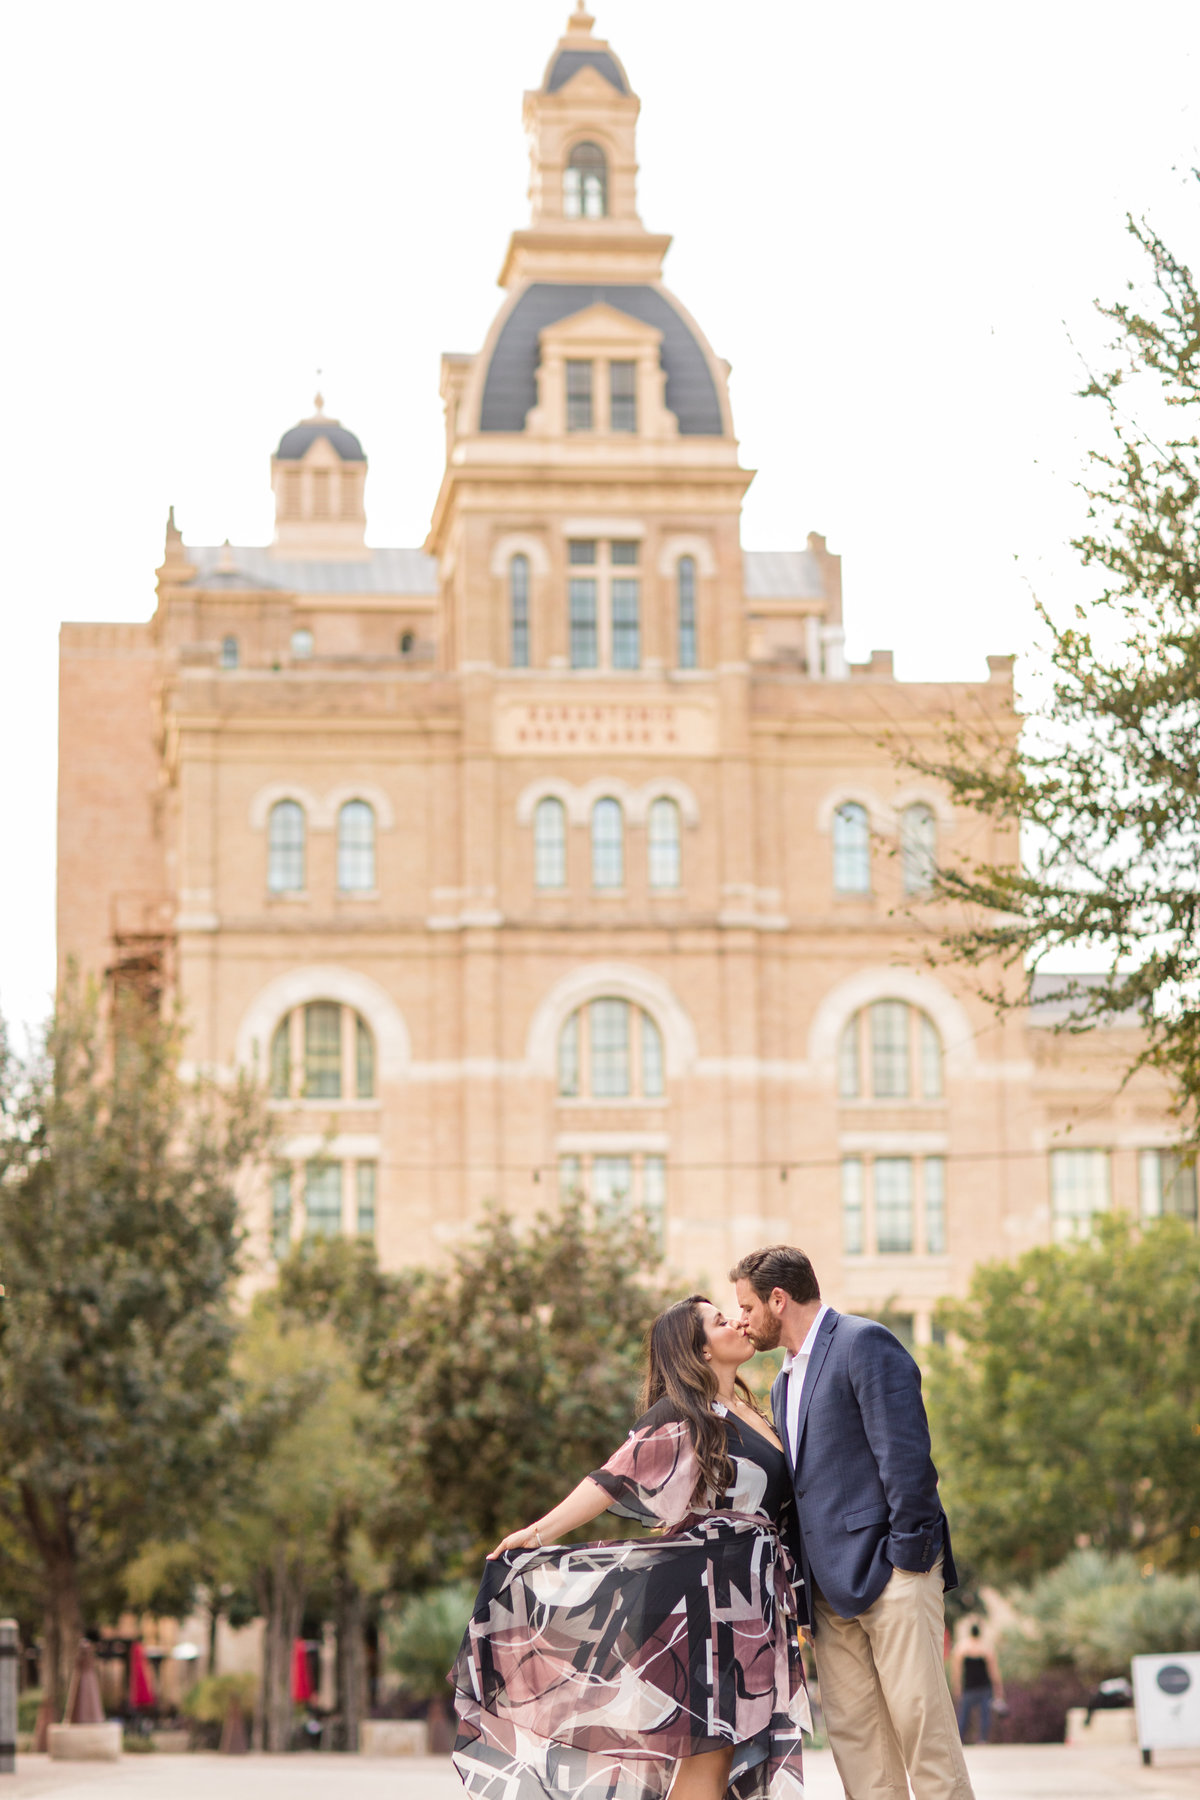 Hannah-Charis-Photography-The-Historic-Pearl-Engagement-Session-8